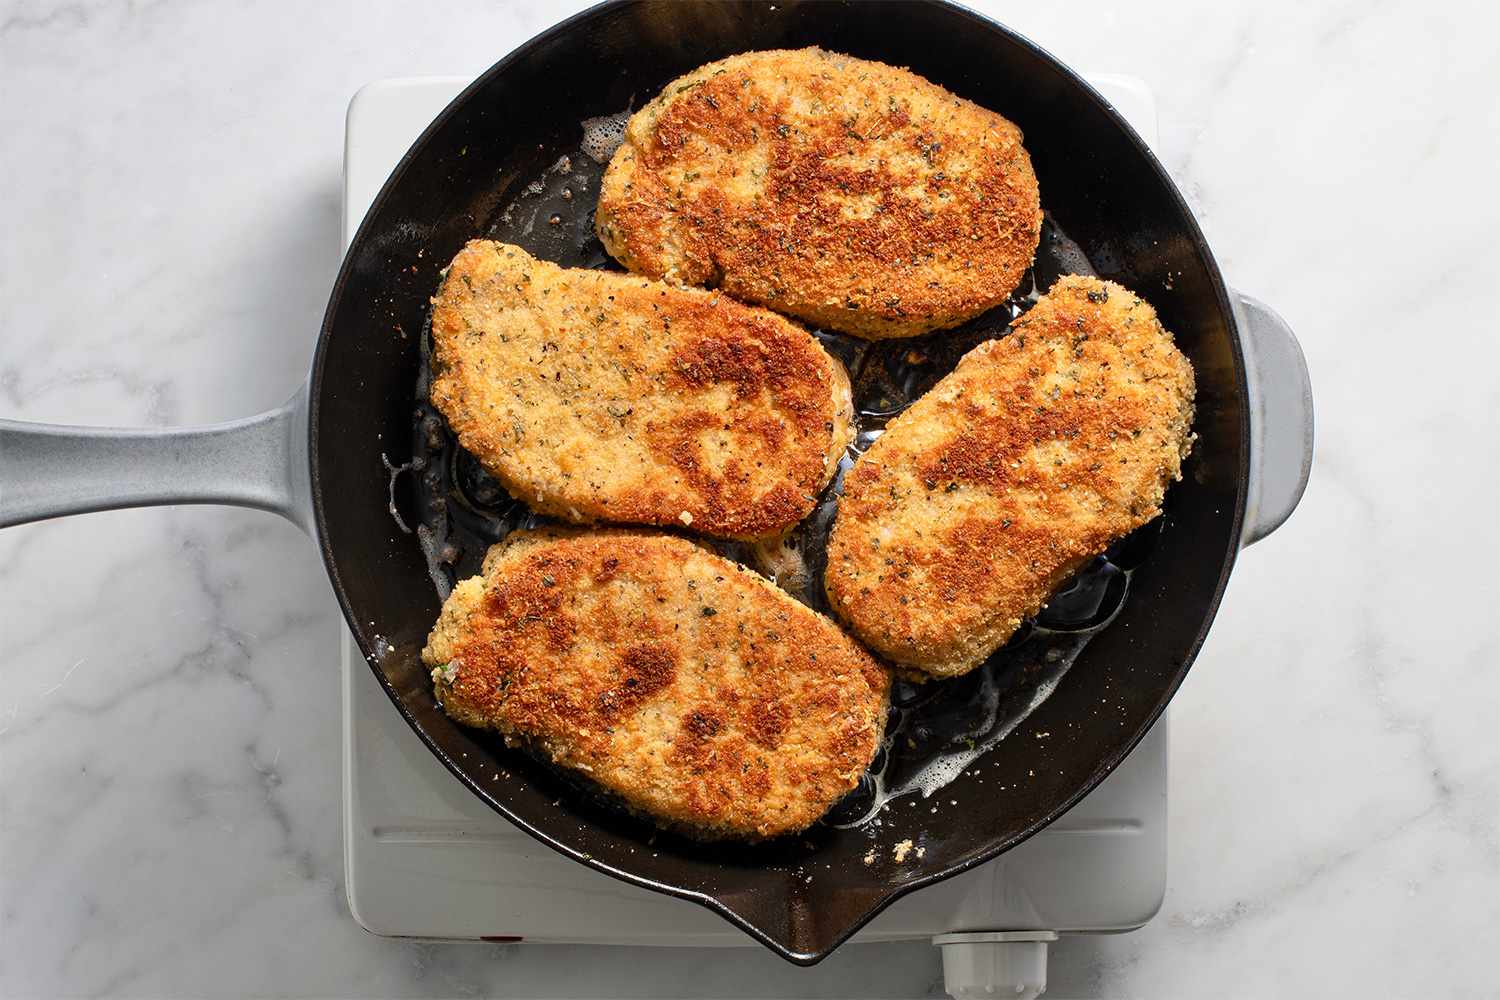 Breaded pork chops cooking in a cast iron skillet on a burner 